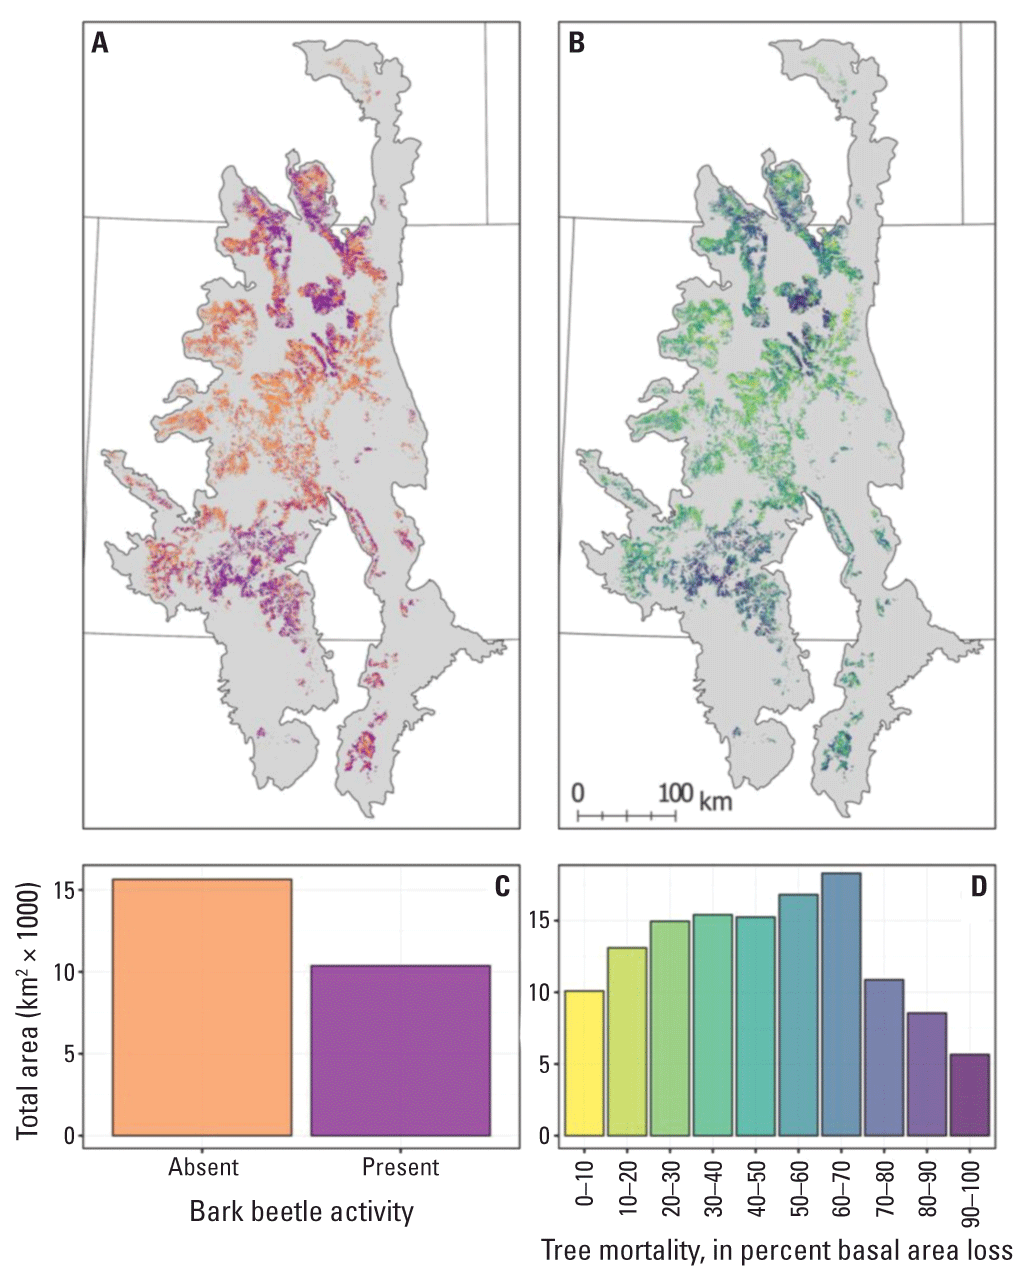 Maps showing the presence and severity of bark beetle-caused tree mortality from 1997
                     to 2019 throughout the southern Rocky Mountains. Graphs showing the total area of
                     presence/absence and total area with different outbreak severities.